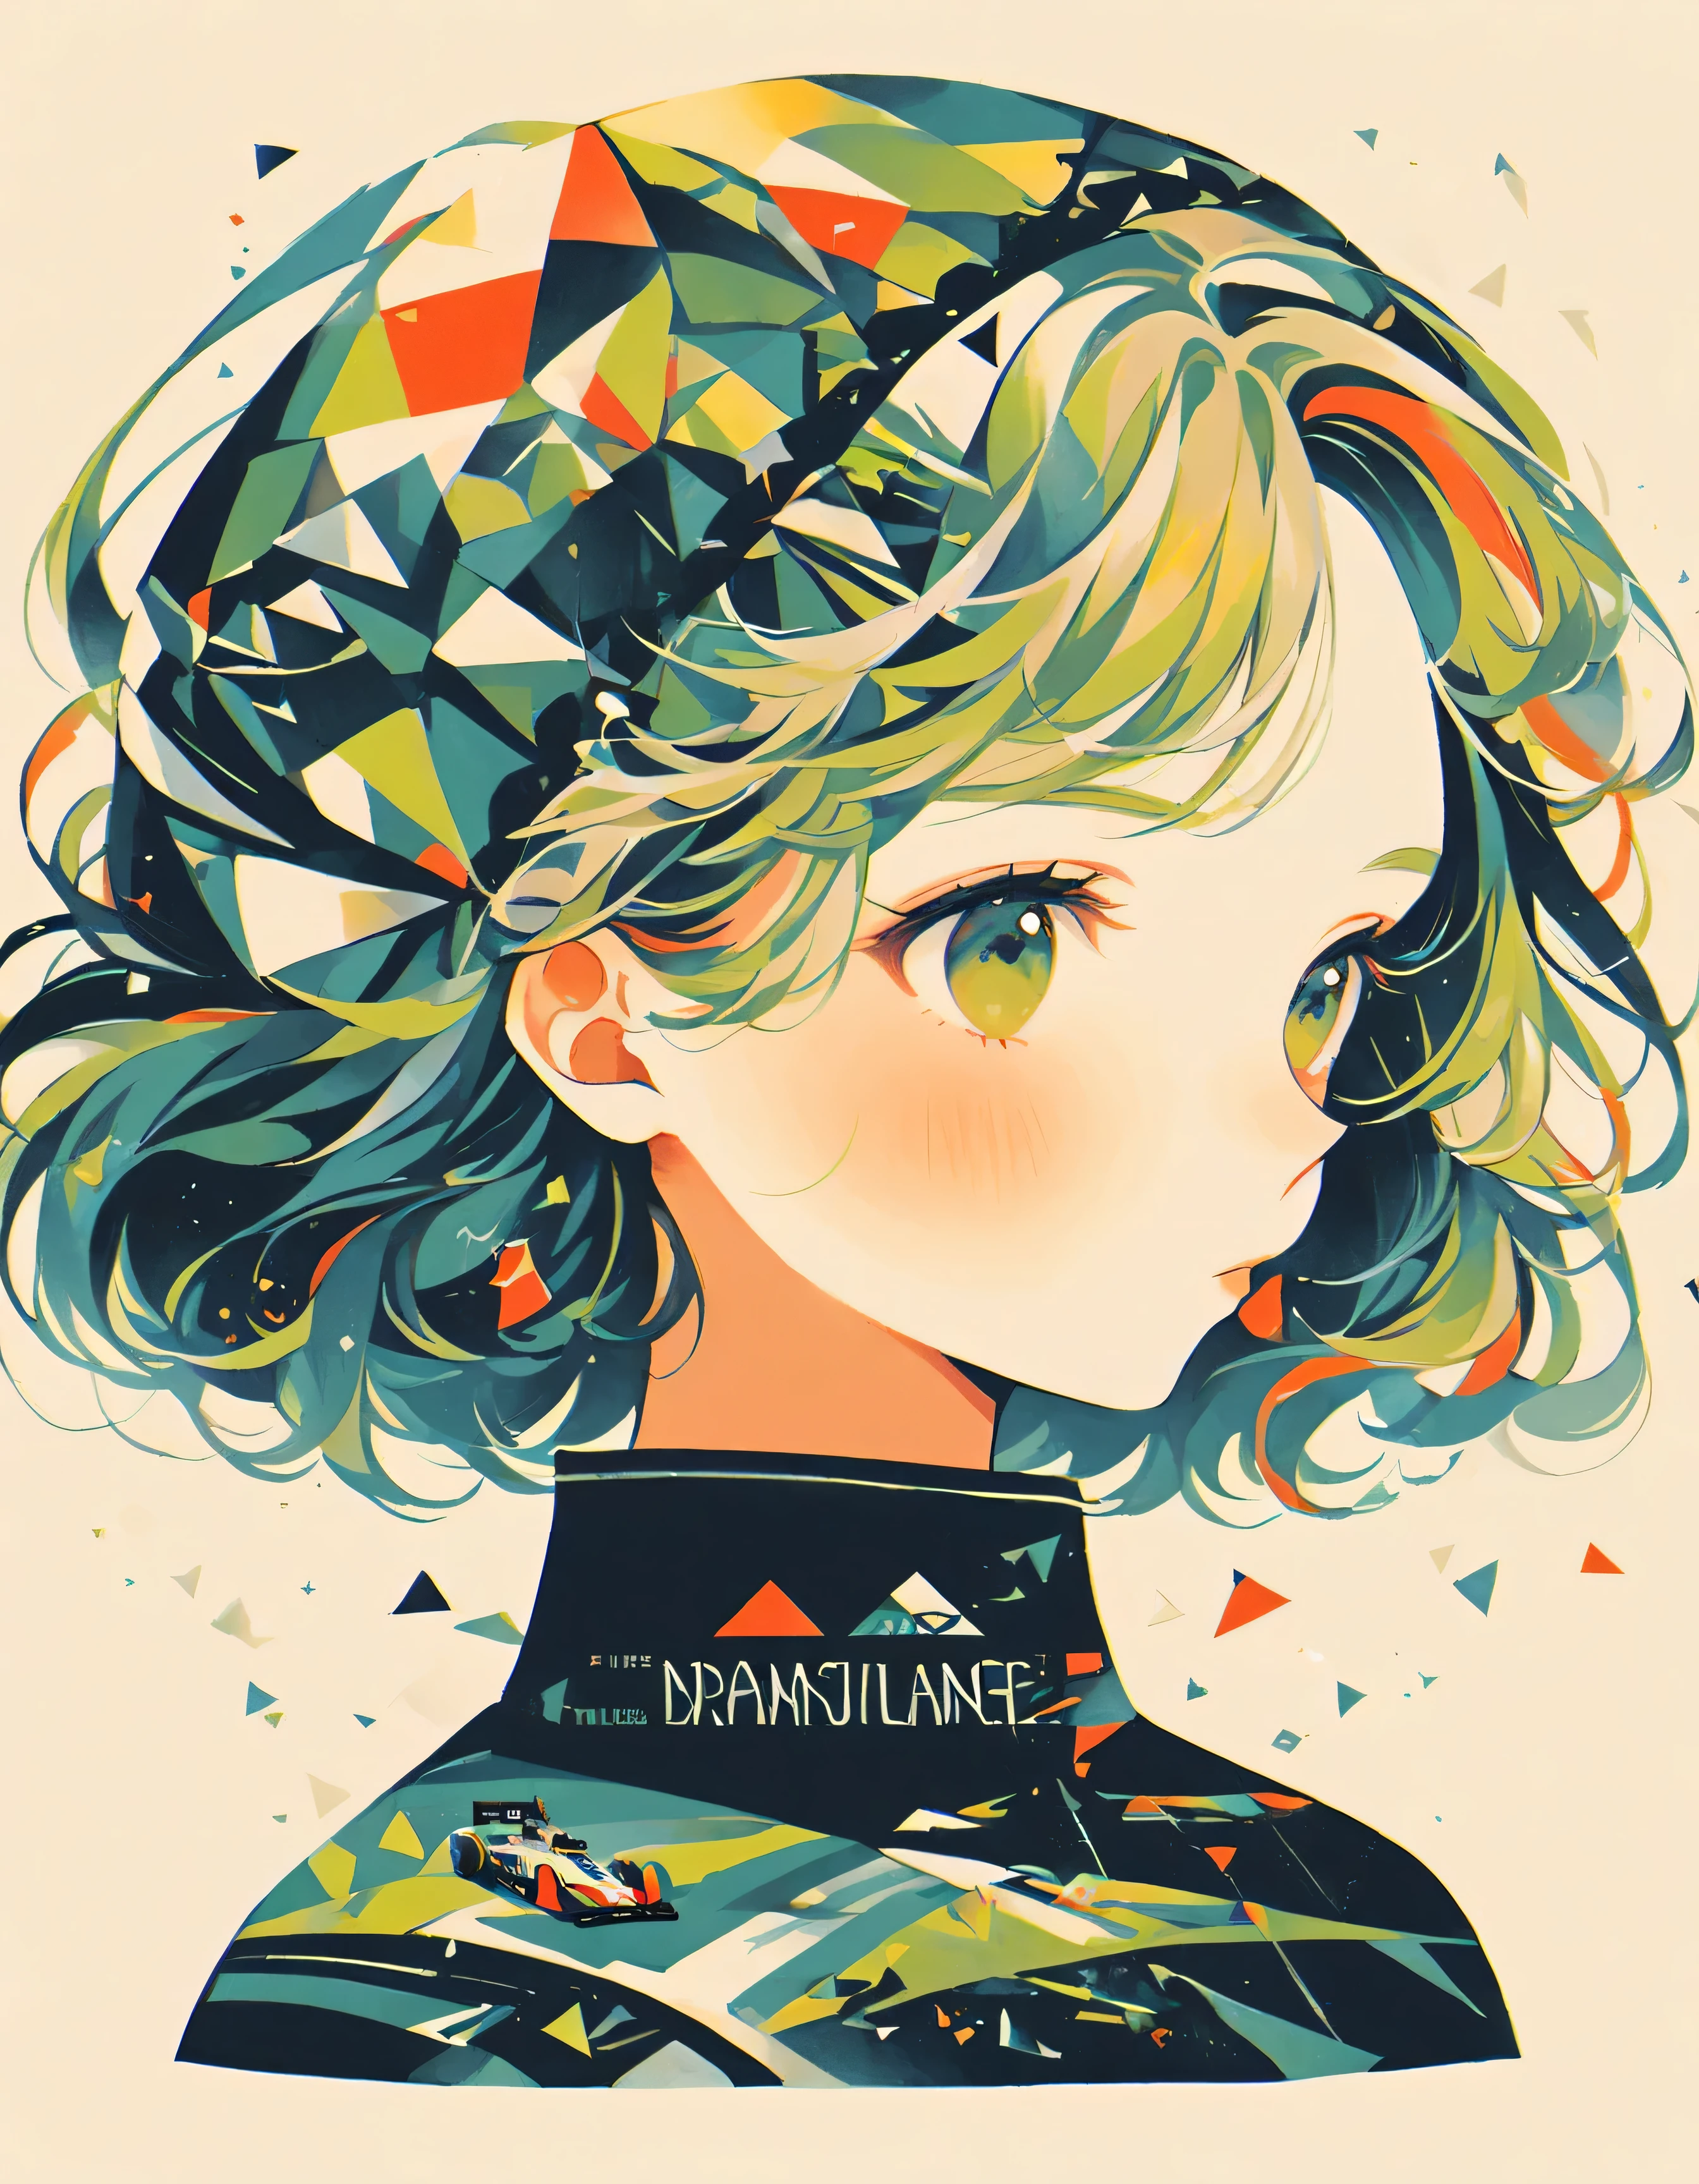 (long shot: 1.8), (masterpiece, highest quality: 1.2), (planar vector: 1.3), artistic concept illustration, Minimalism, maximalist style, (F1 racing), (racing), A girl&#39;s head decorated with lots of colorful F1 racing cars and trophies, flag, Hair decorated with lace and track elements, Decorated with various patterns and fonts (Neck fused with scattered racing tracks), (sports trail), rainbow lane fantasy illustration, Evoke the charm of crazy racing. The background blends into the hair, Combining portrait and lace elements, used for imaginative illustrations, dream concept,